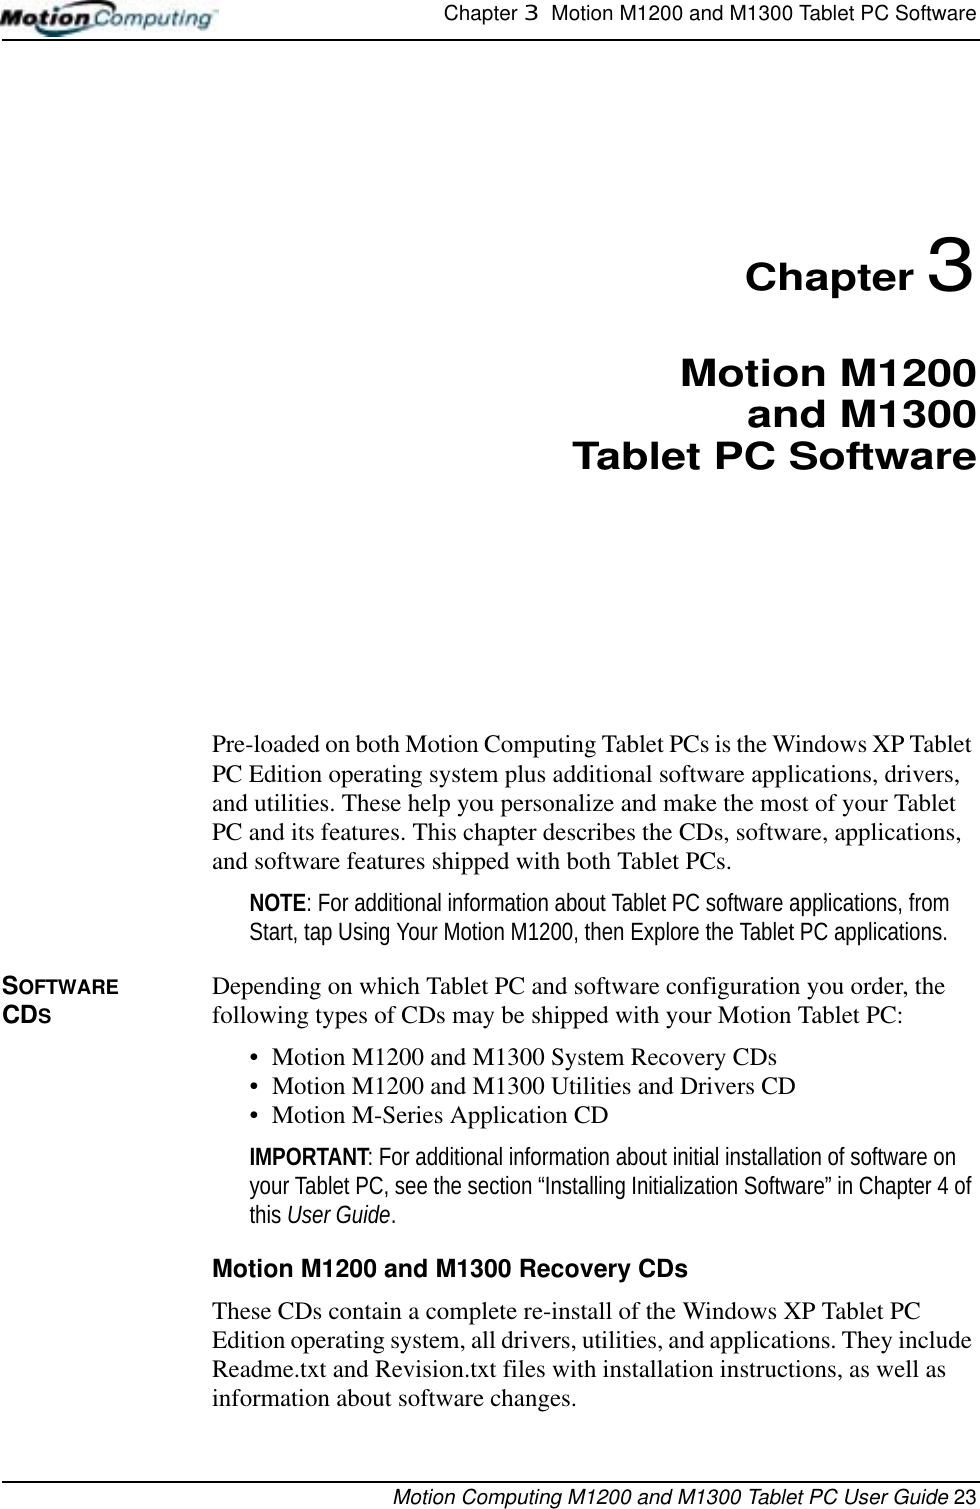 Chapter 3  Motion M1200 and M1300 Tablet PC SoftwareMotion Computing M1200 and M1300 Tablet PC User Guide 23Chapter 3Motion M1200and M1300Tablet PC SoftwarePre-loaded on both Motion Computing Tablet PCs is the Windows XP Tablet PC Edition operating system plus additional software applications, drivers, and utilities. These help you personalize and make the most of your Tablet PC and its features. This chapter describes the CDs, software, applications, and software features shipped with both Tablet PCs.NOTE: For additional information about Tablet PC software applications, from Start, tap Using Your Motion M1200, then Explore the Tablet PC applications. SOFTWARE CDSDepending on which Tablet PC and software configuration you order, the following types of CDs may be shipped with your Motion Tablet PC:• Motion M1200 and M1300 System Recovery CDs • Motion M1200 and M1300 Utilities and Drivers CD• Motion M-Series Application CDIMPORTANT: For additional information about initial installation of software on your Tablet PC, see the section “Installing Initialization Software” in Chapter 4 of this User Guide. Motion M1200 and M1300 Recovery CDsThese CDs contain a complete re-install of the Windows XP Tablet PC Edition operating system, all drivers, utilities, and applications. They include Readme.txt and Revision.txt files with installation instructions, as well as information about software changes.